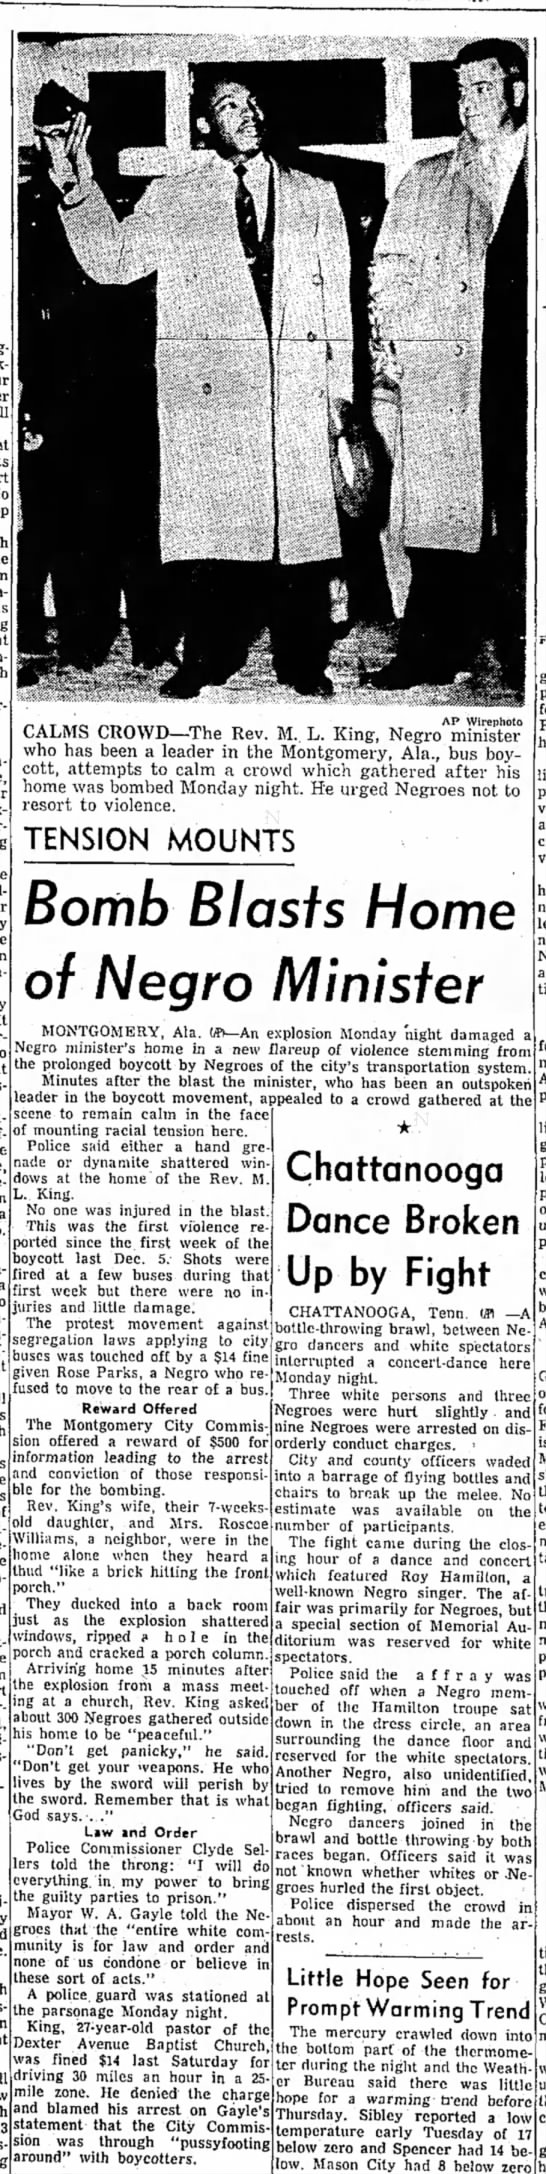 January 1956: Martin Luther King Jr.'s home is bombed - 